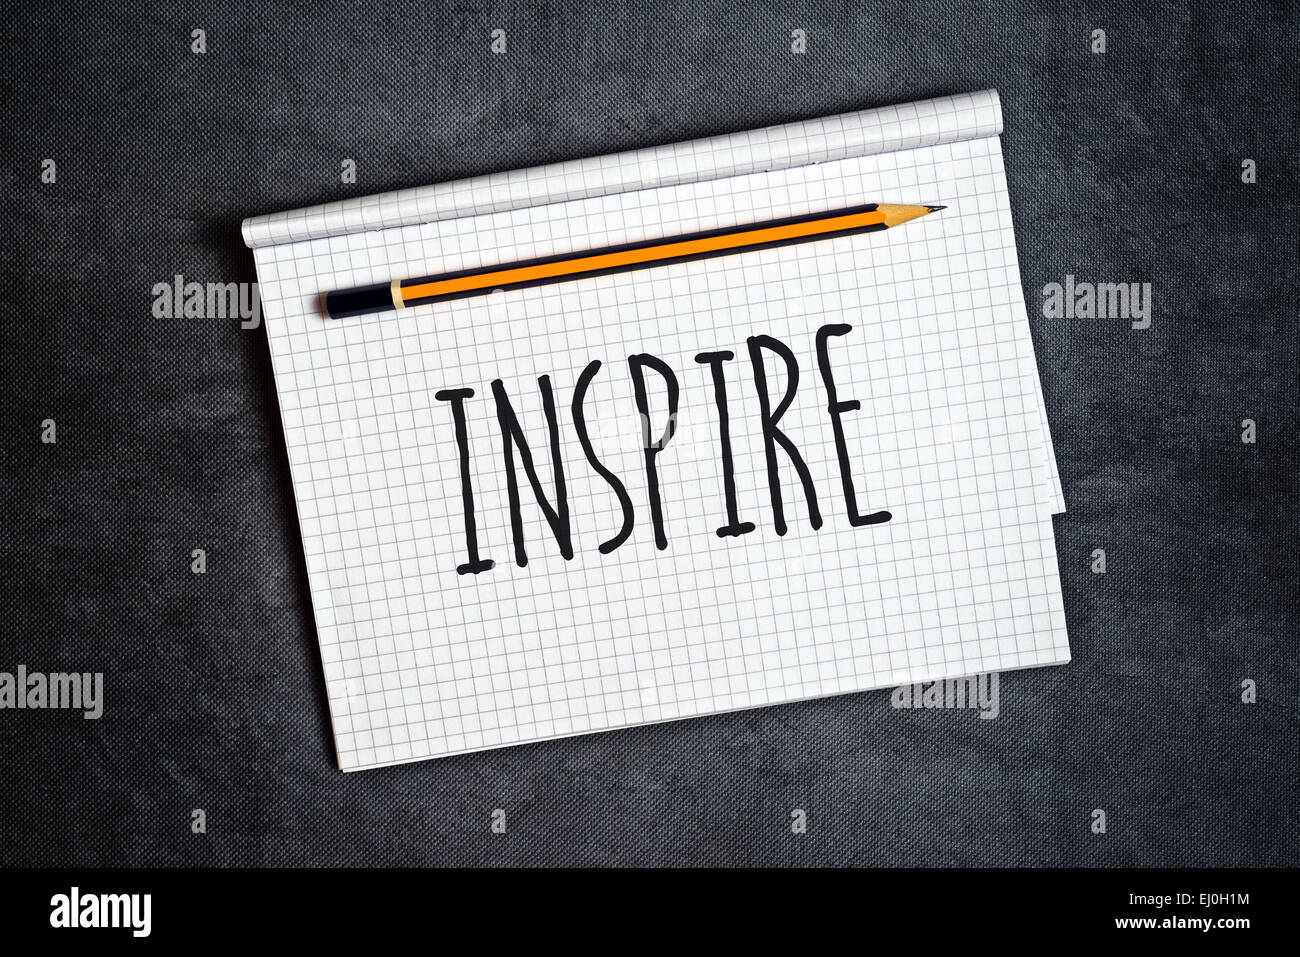 Inspire Creative Writing Concept With Pencil and Notepad on Table, Top View. Stock Photo